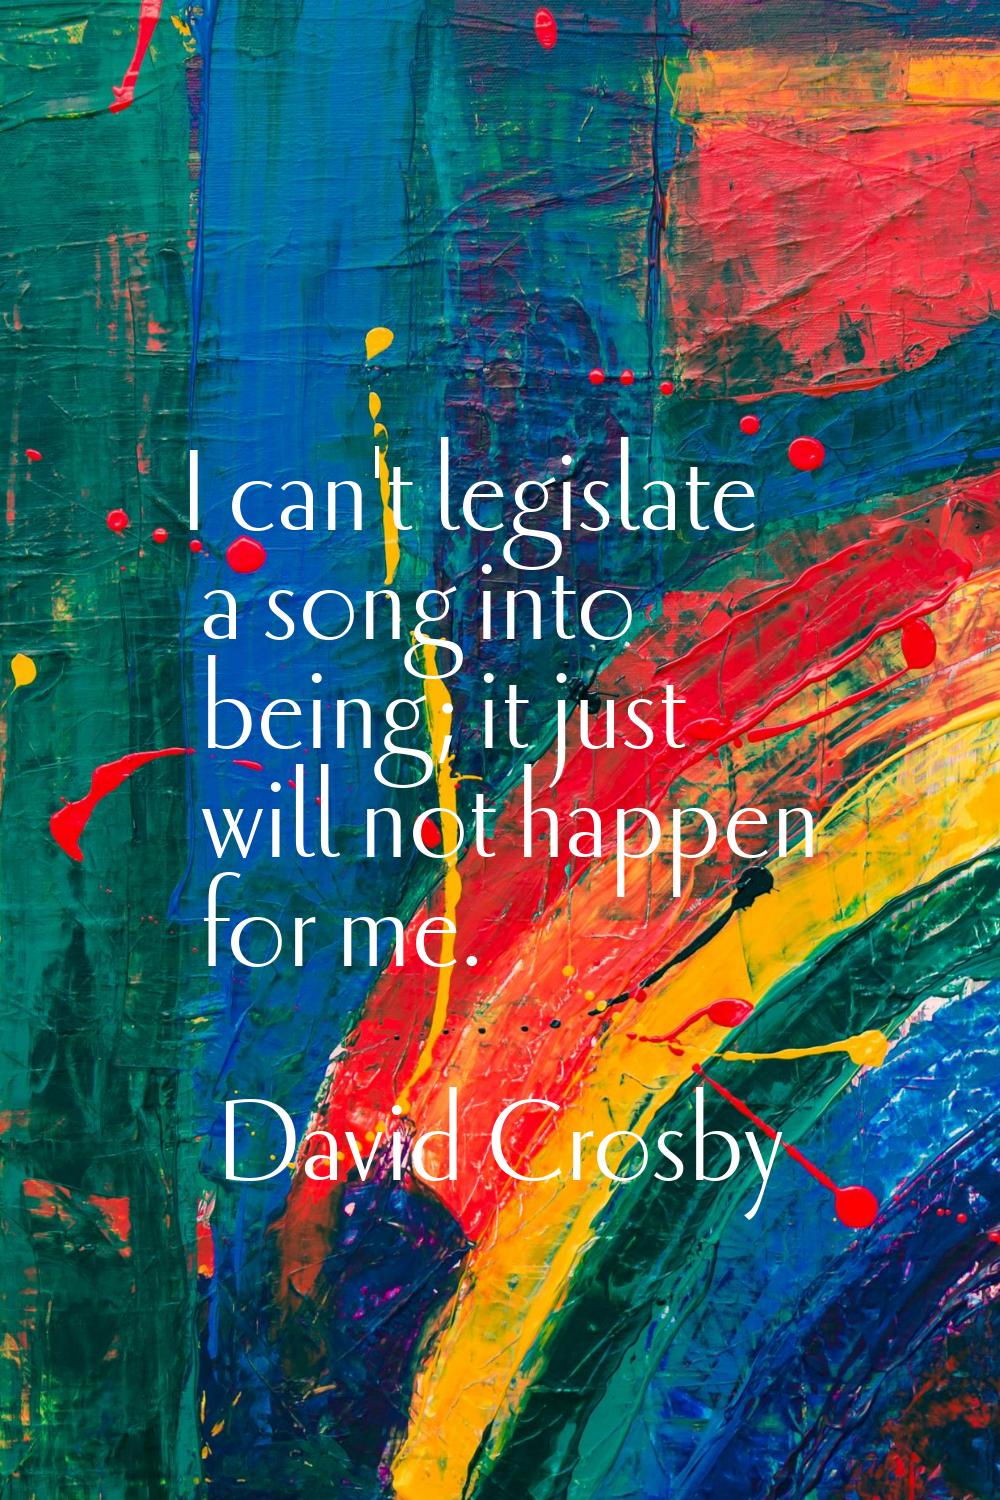 I can't legislate a song into being; it just will not happen for me.